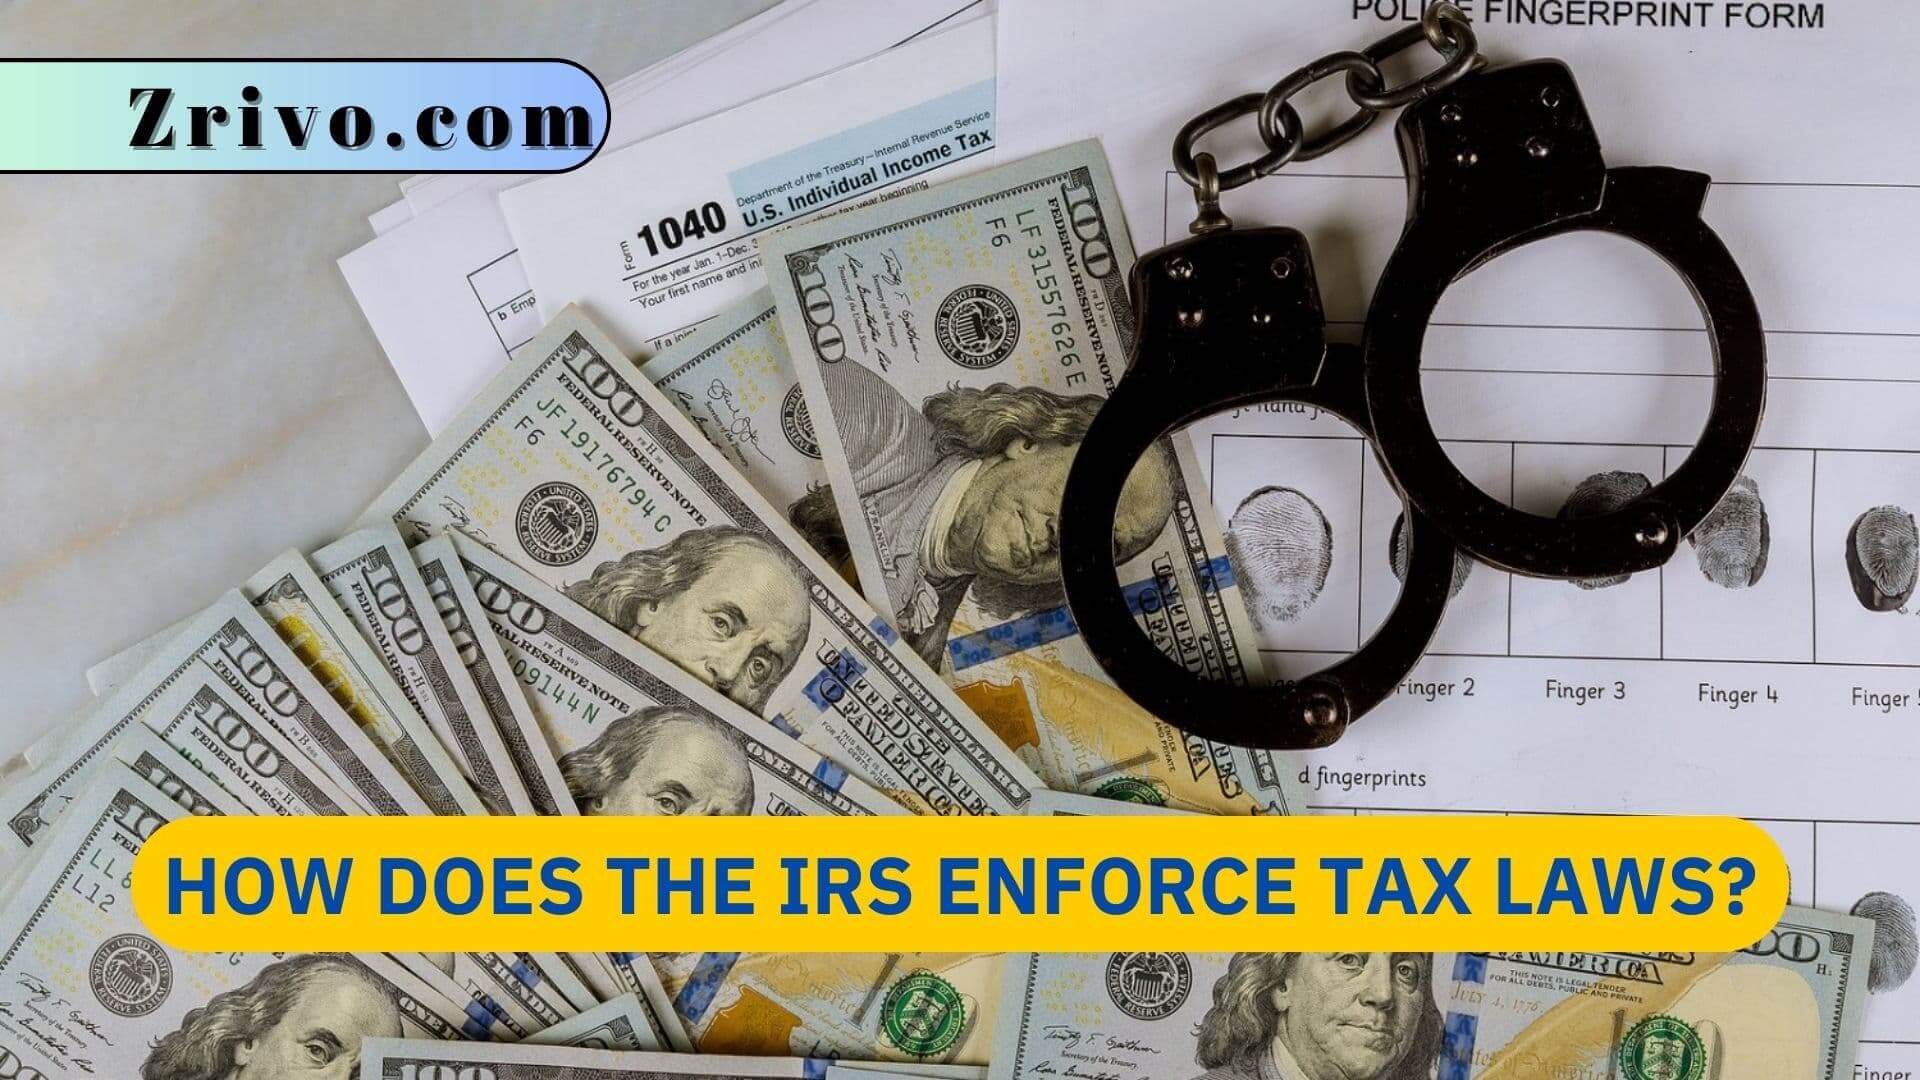 How Does the IRS Enforce Tax Laws